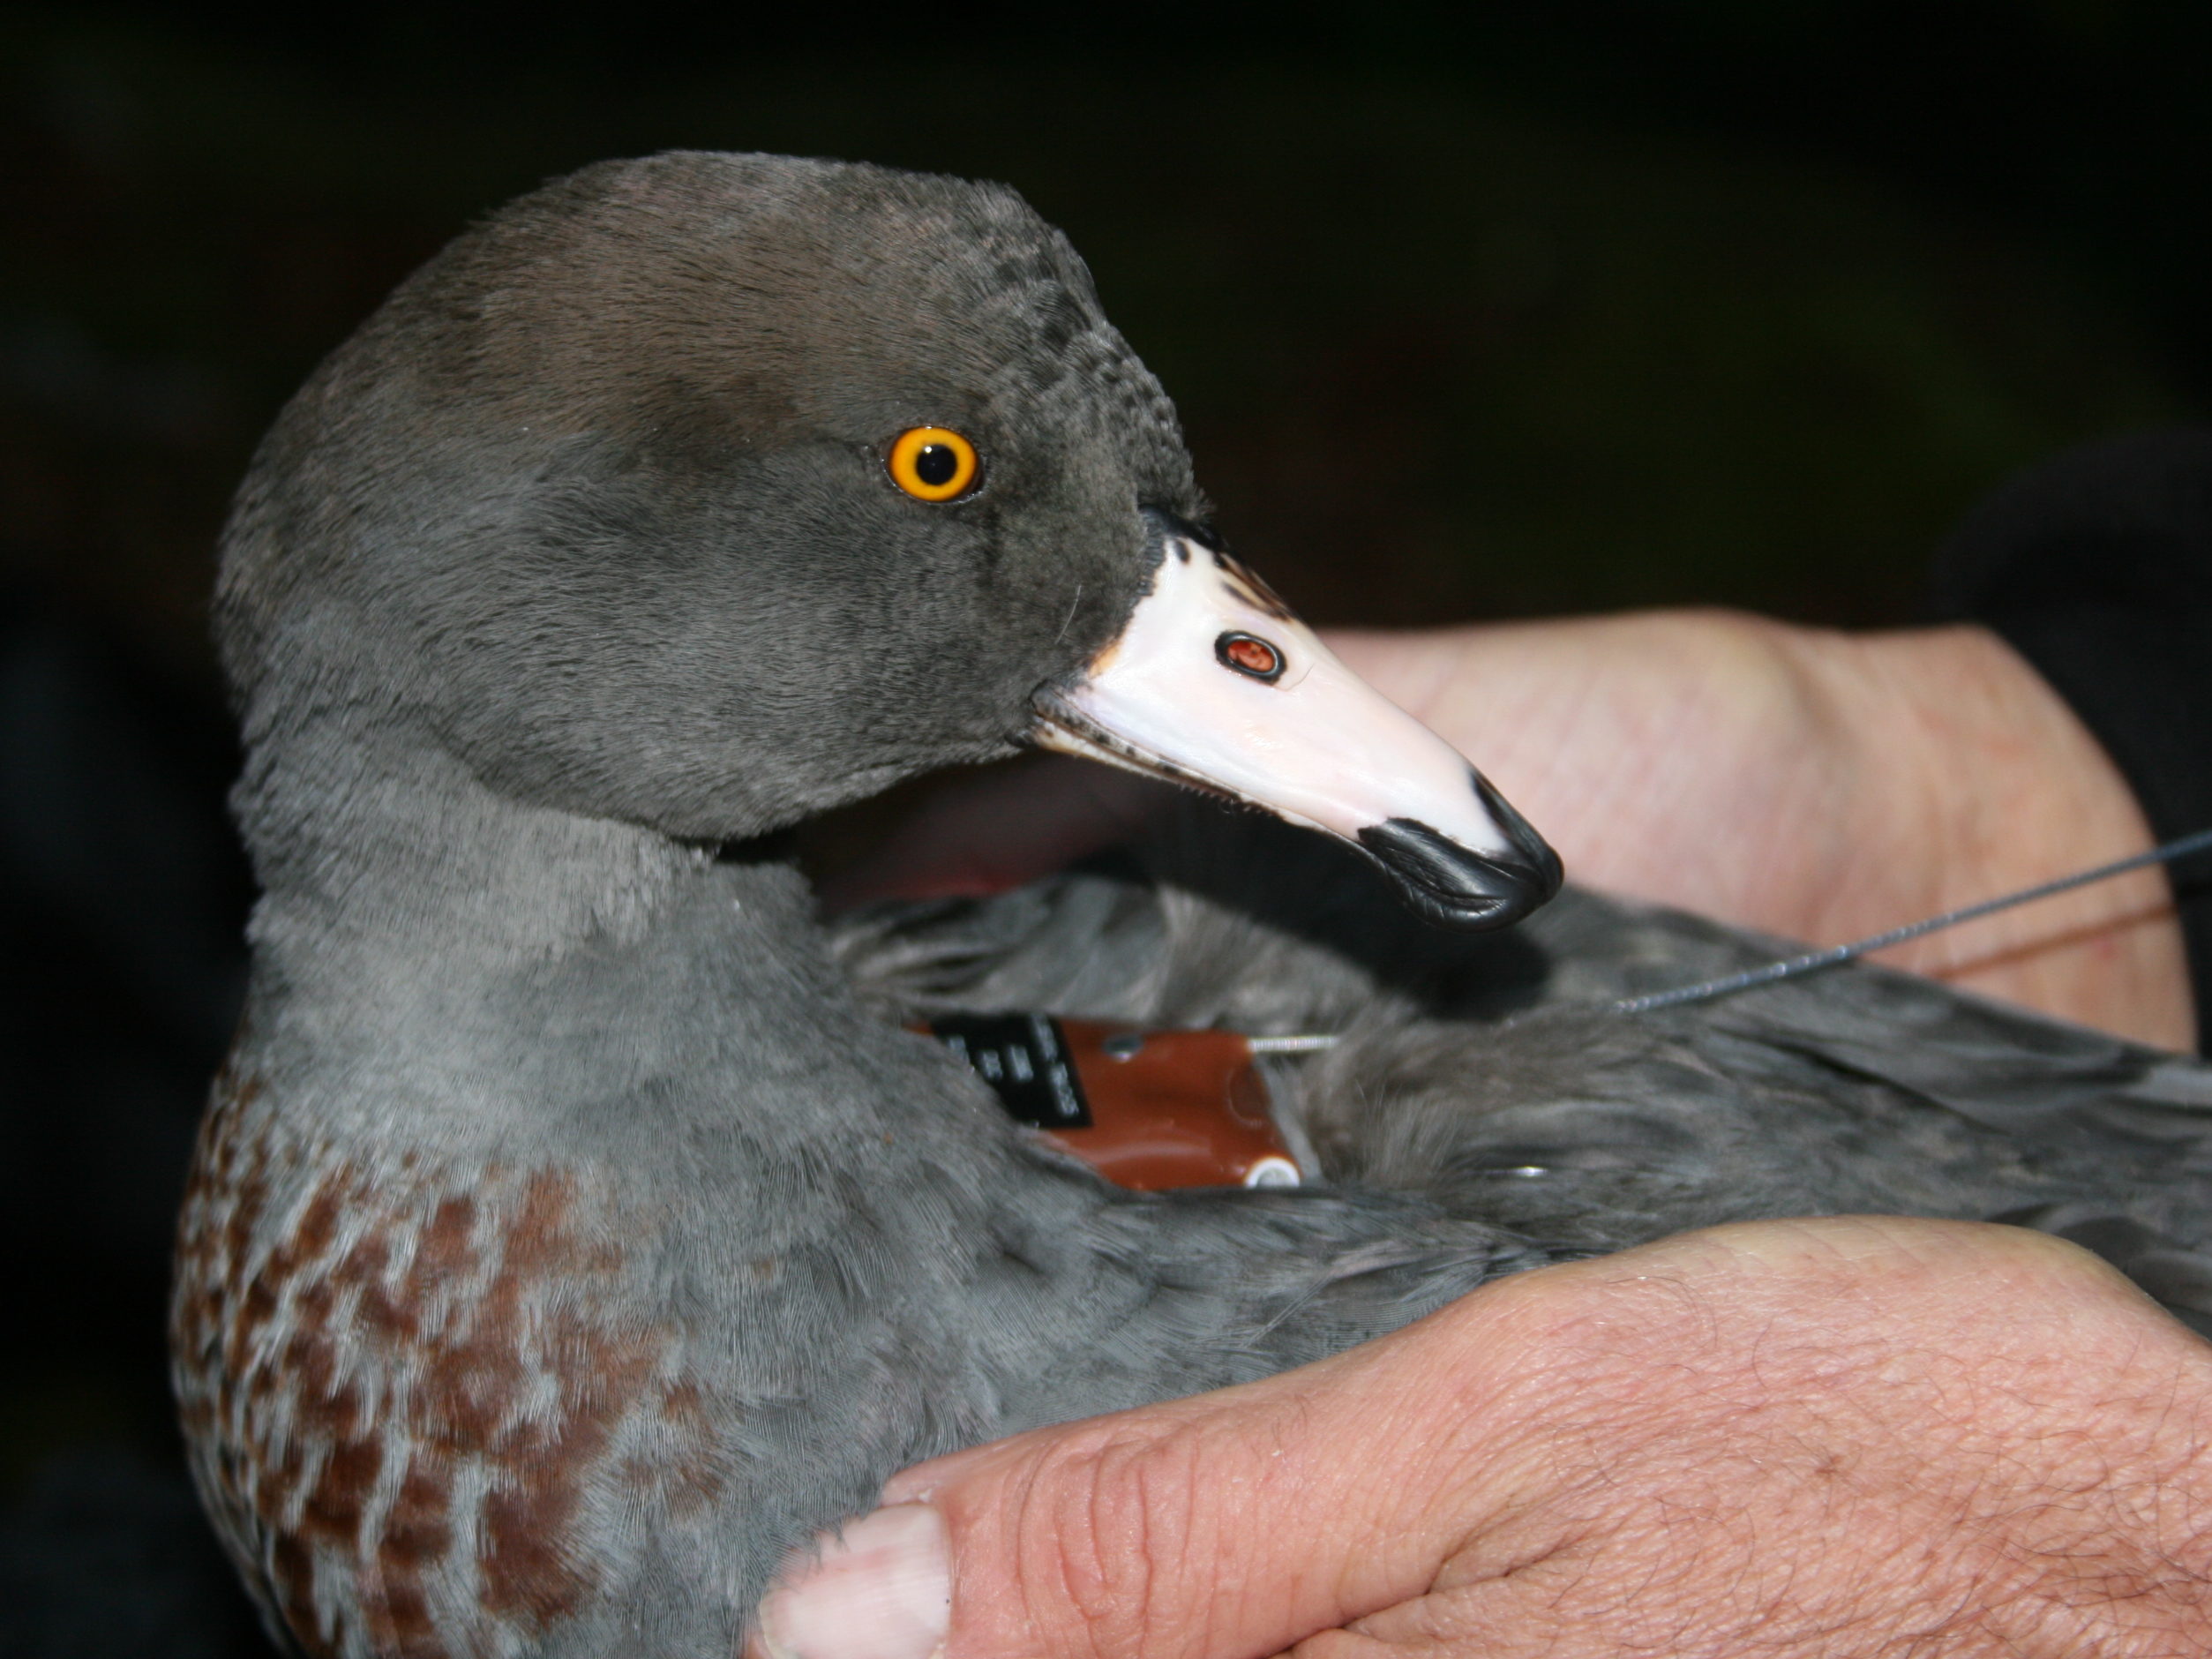 A whio being held with a transmitter on its back.